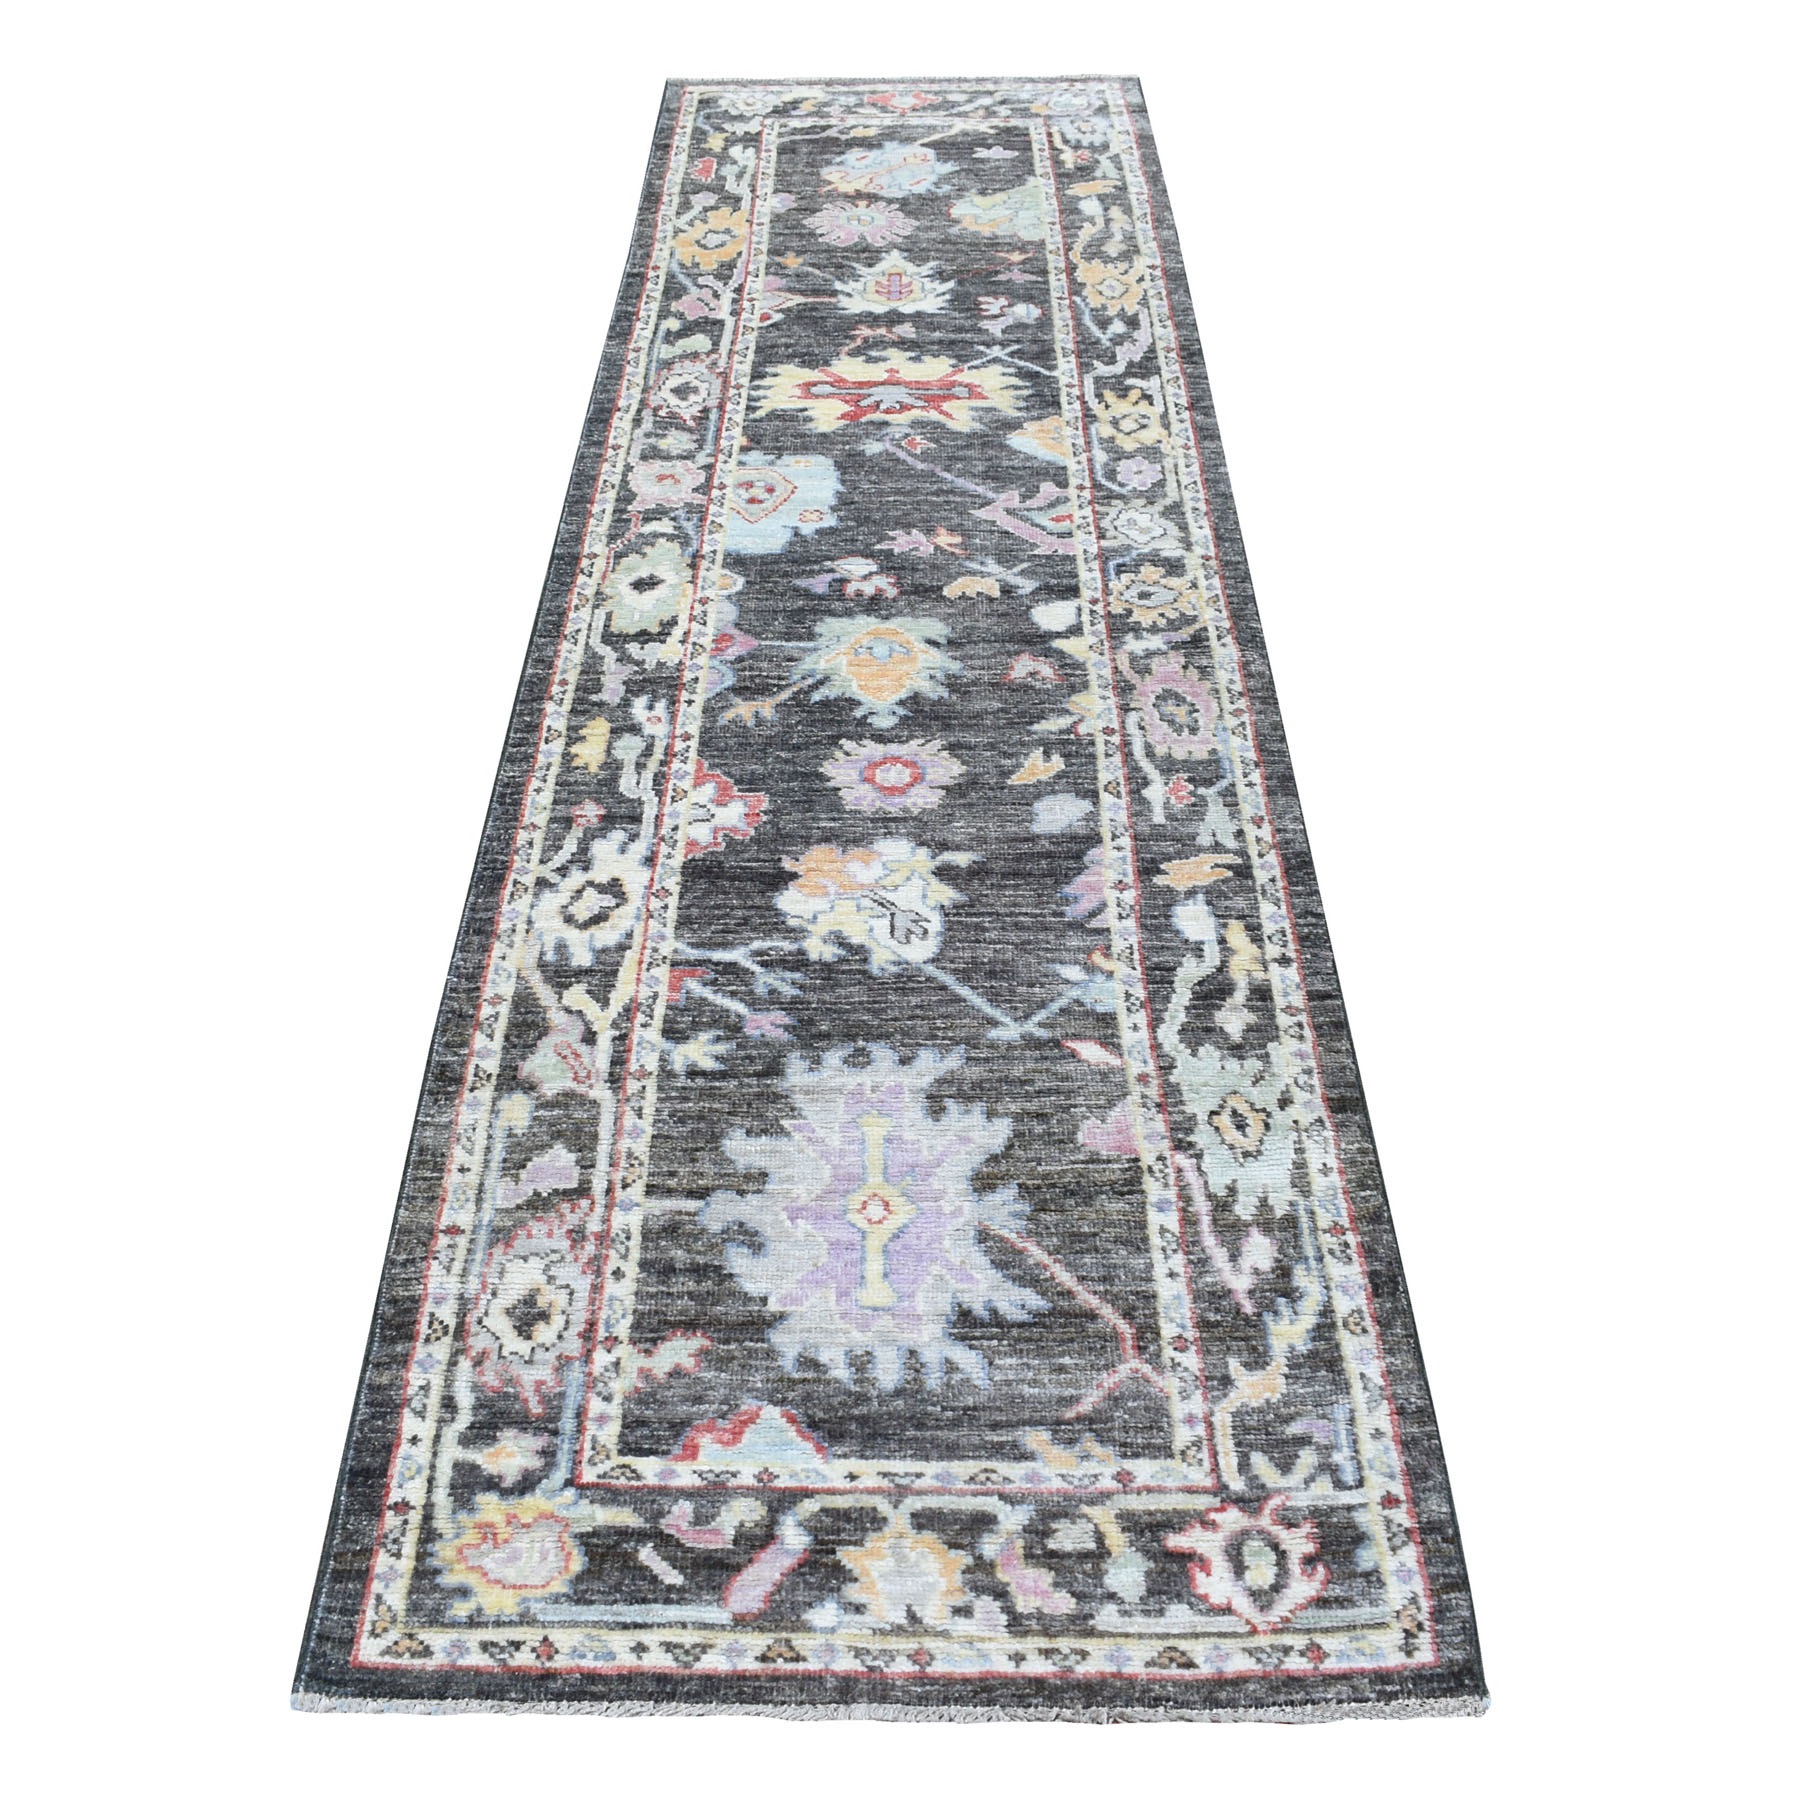 Agra And Turkish Collection Hand Knotted Black Rug No: 1113192